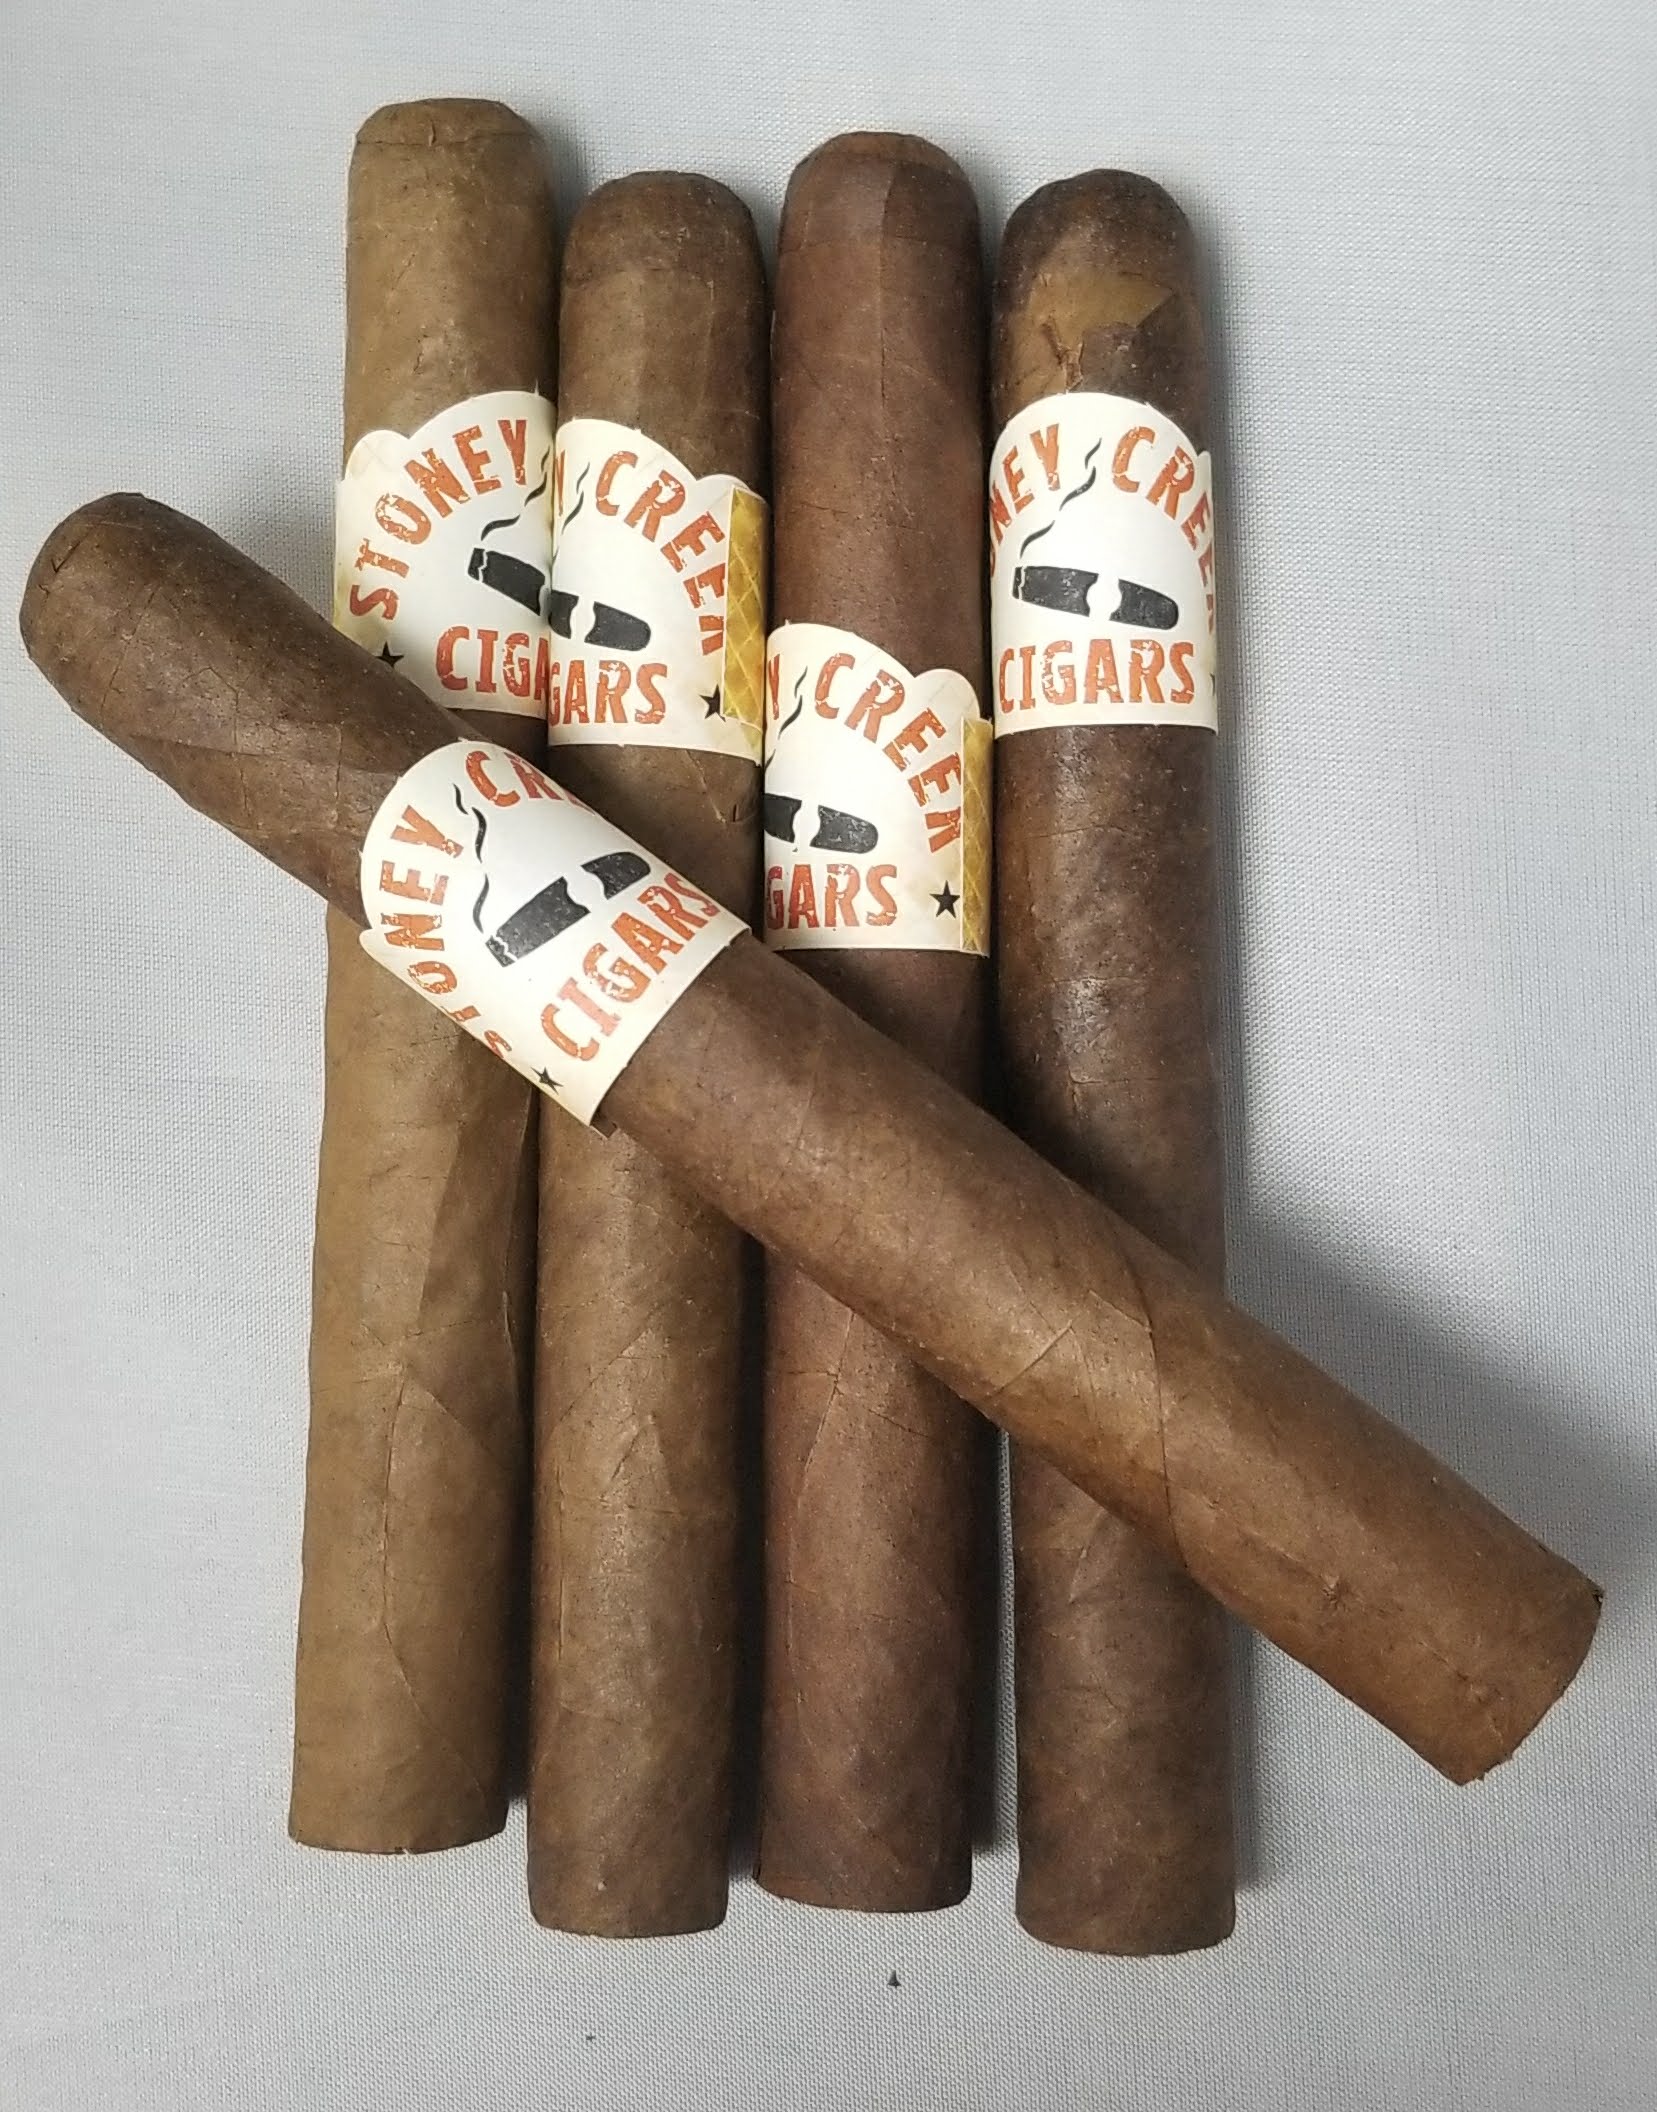 Dominican cigar - 5 pack